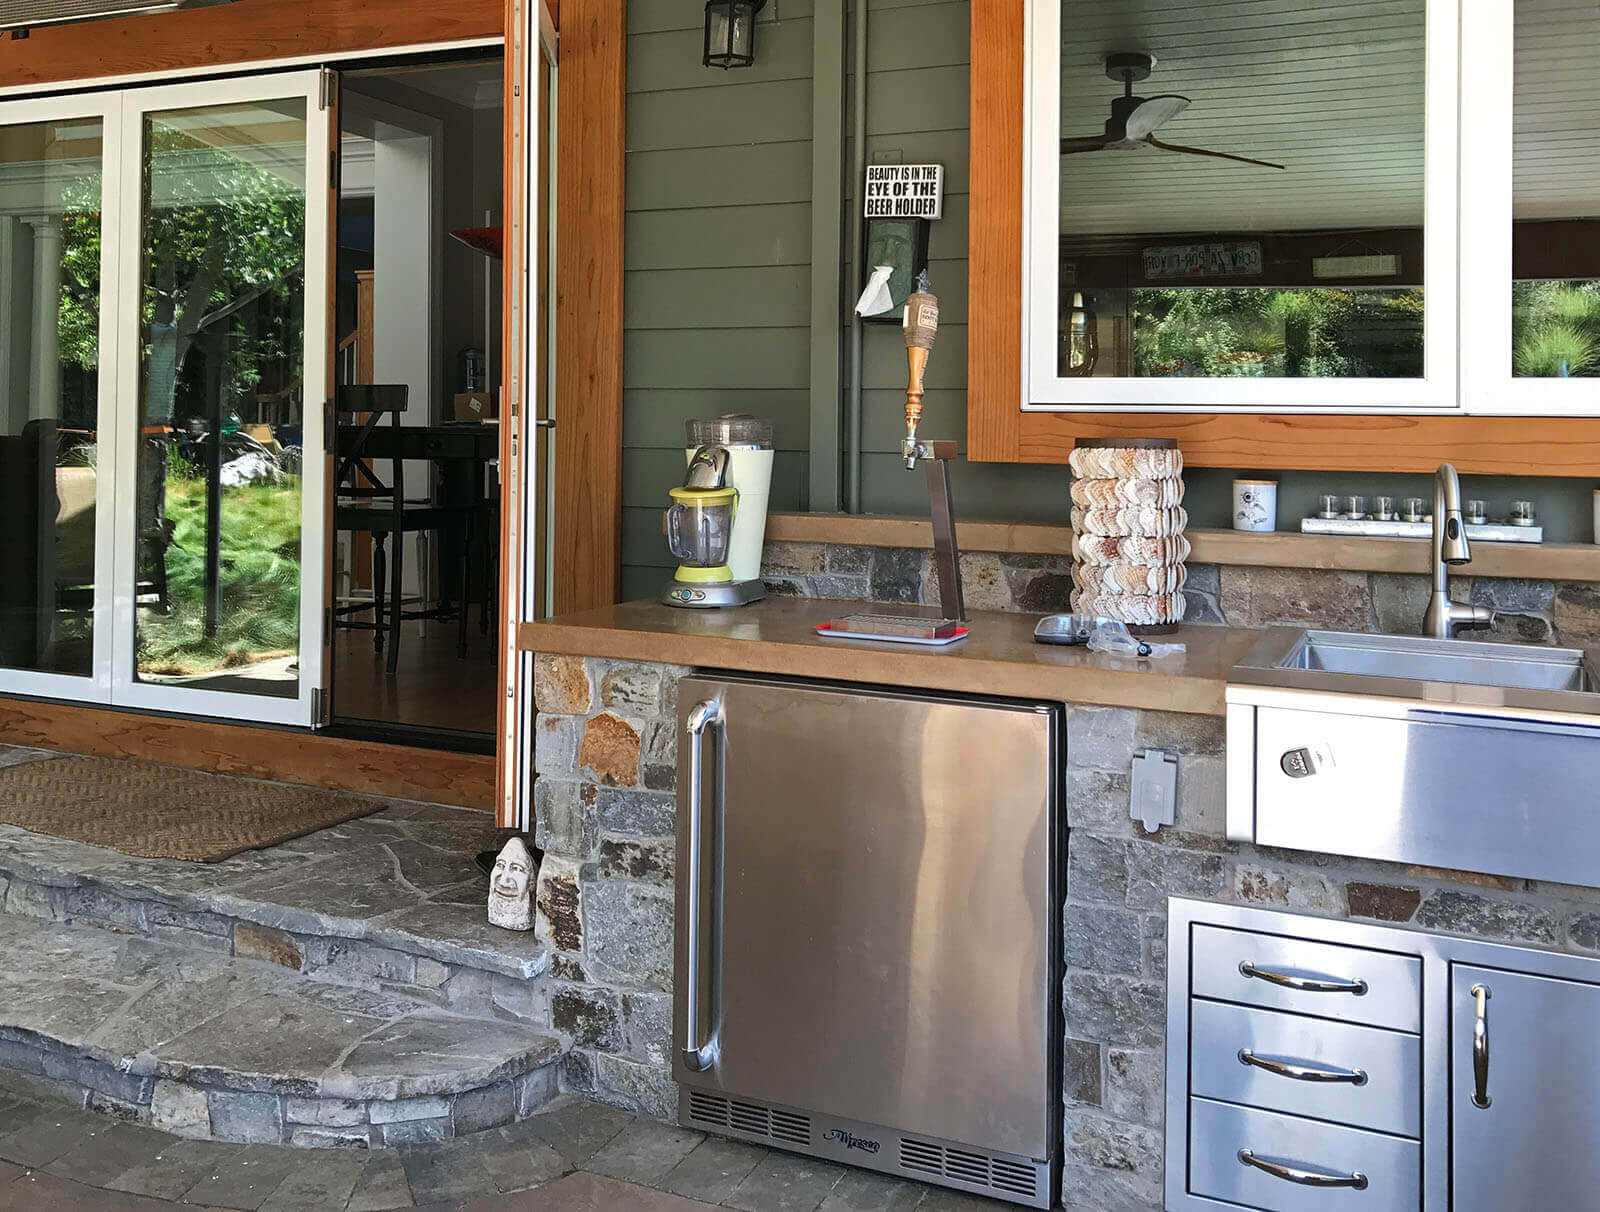 Outdoor kitchen prep area with beer tap, staged counters, cooled storage space, and large basin sink